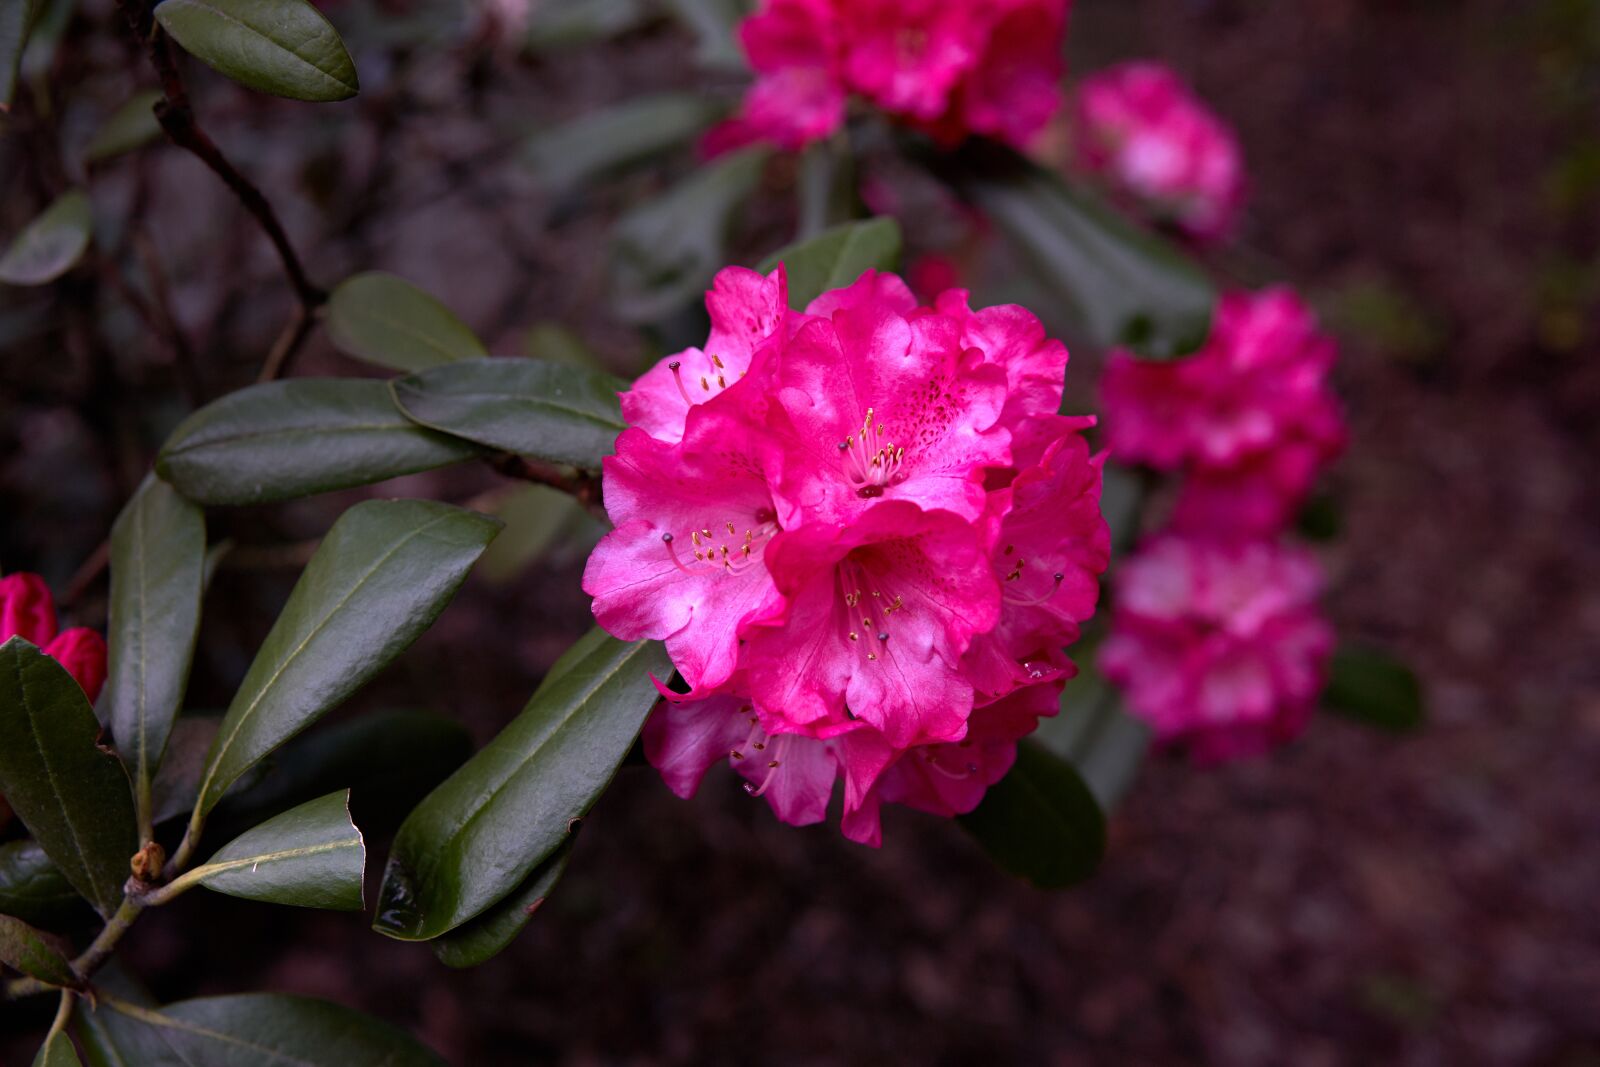 Zeiss Vario-Sonnar T* 24-70 mm F2.8 ZA SSM (SAL2470Z) sample photo. Rhododendron, oregon, pink photography